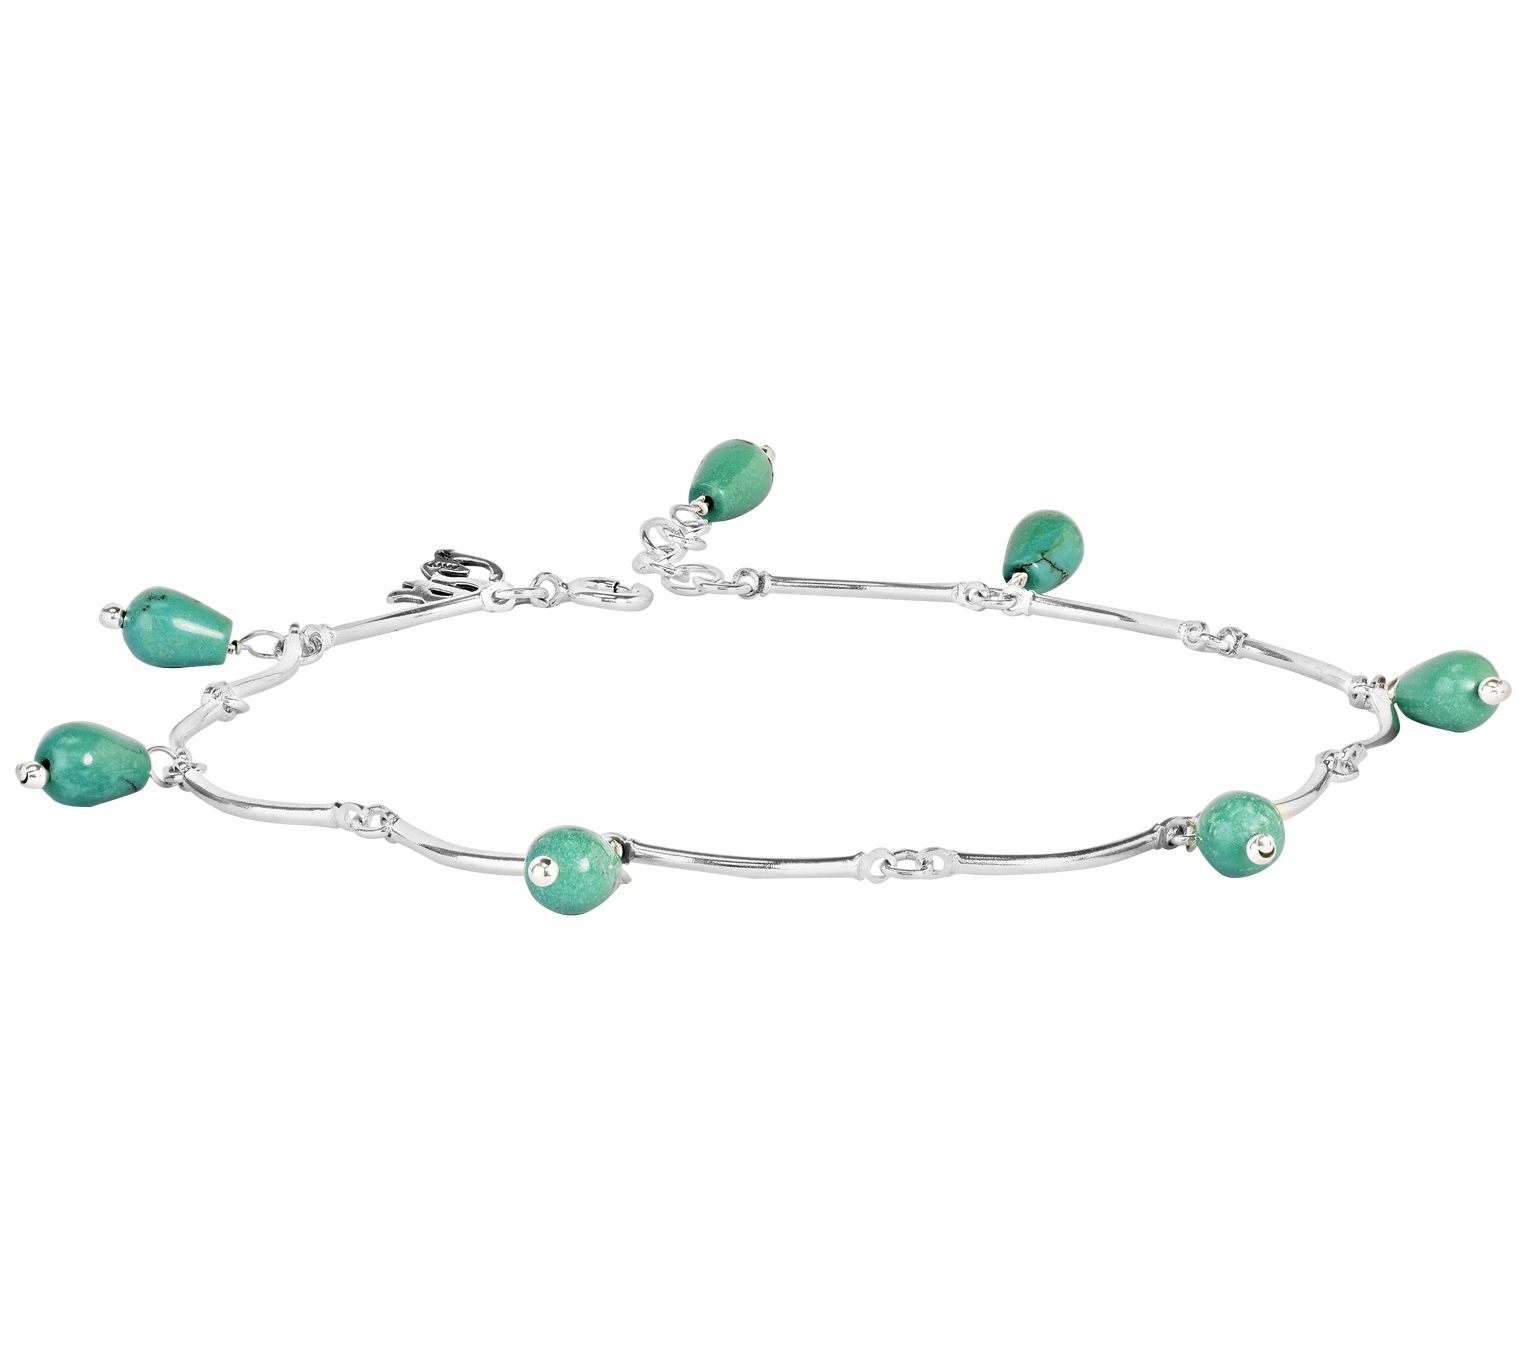 American West Sterling Green Turquoise Bead Ankle Bracelet - QVC.com